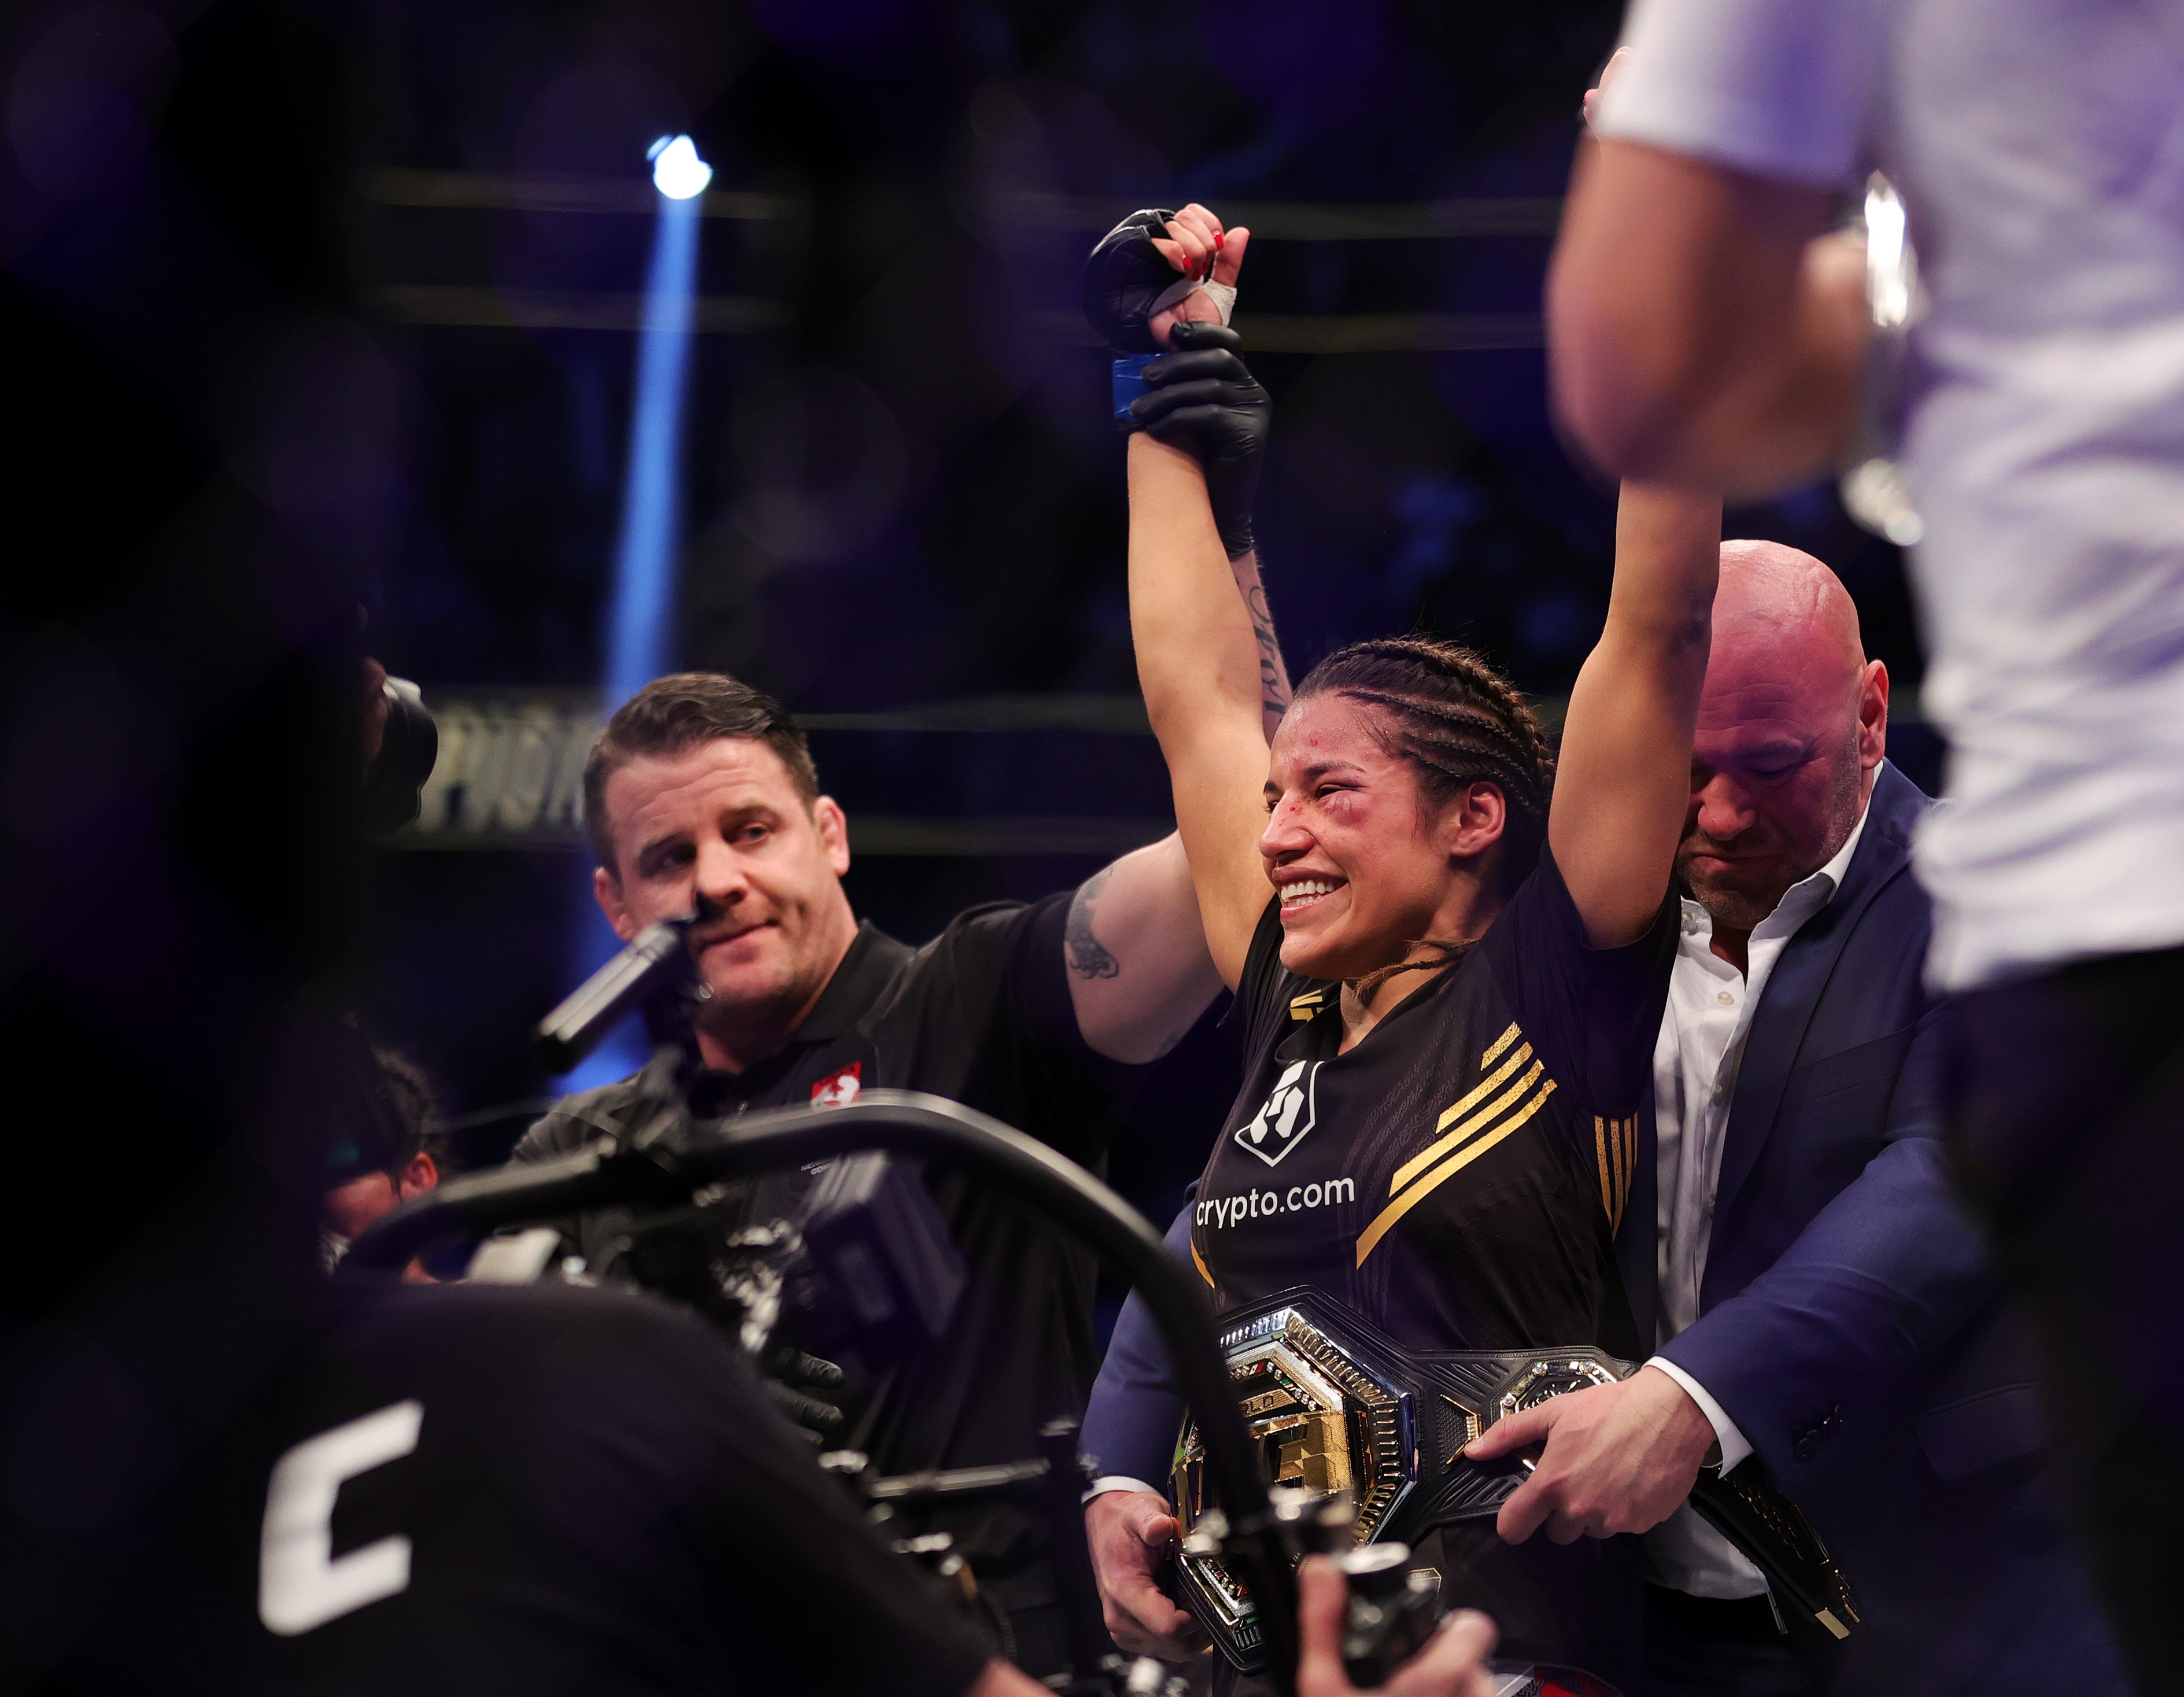 Julianna Pena was ranked third at bantamweight heading into the title fight